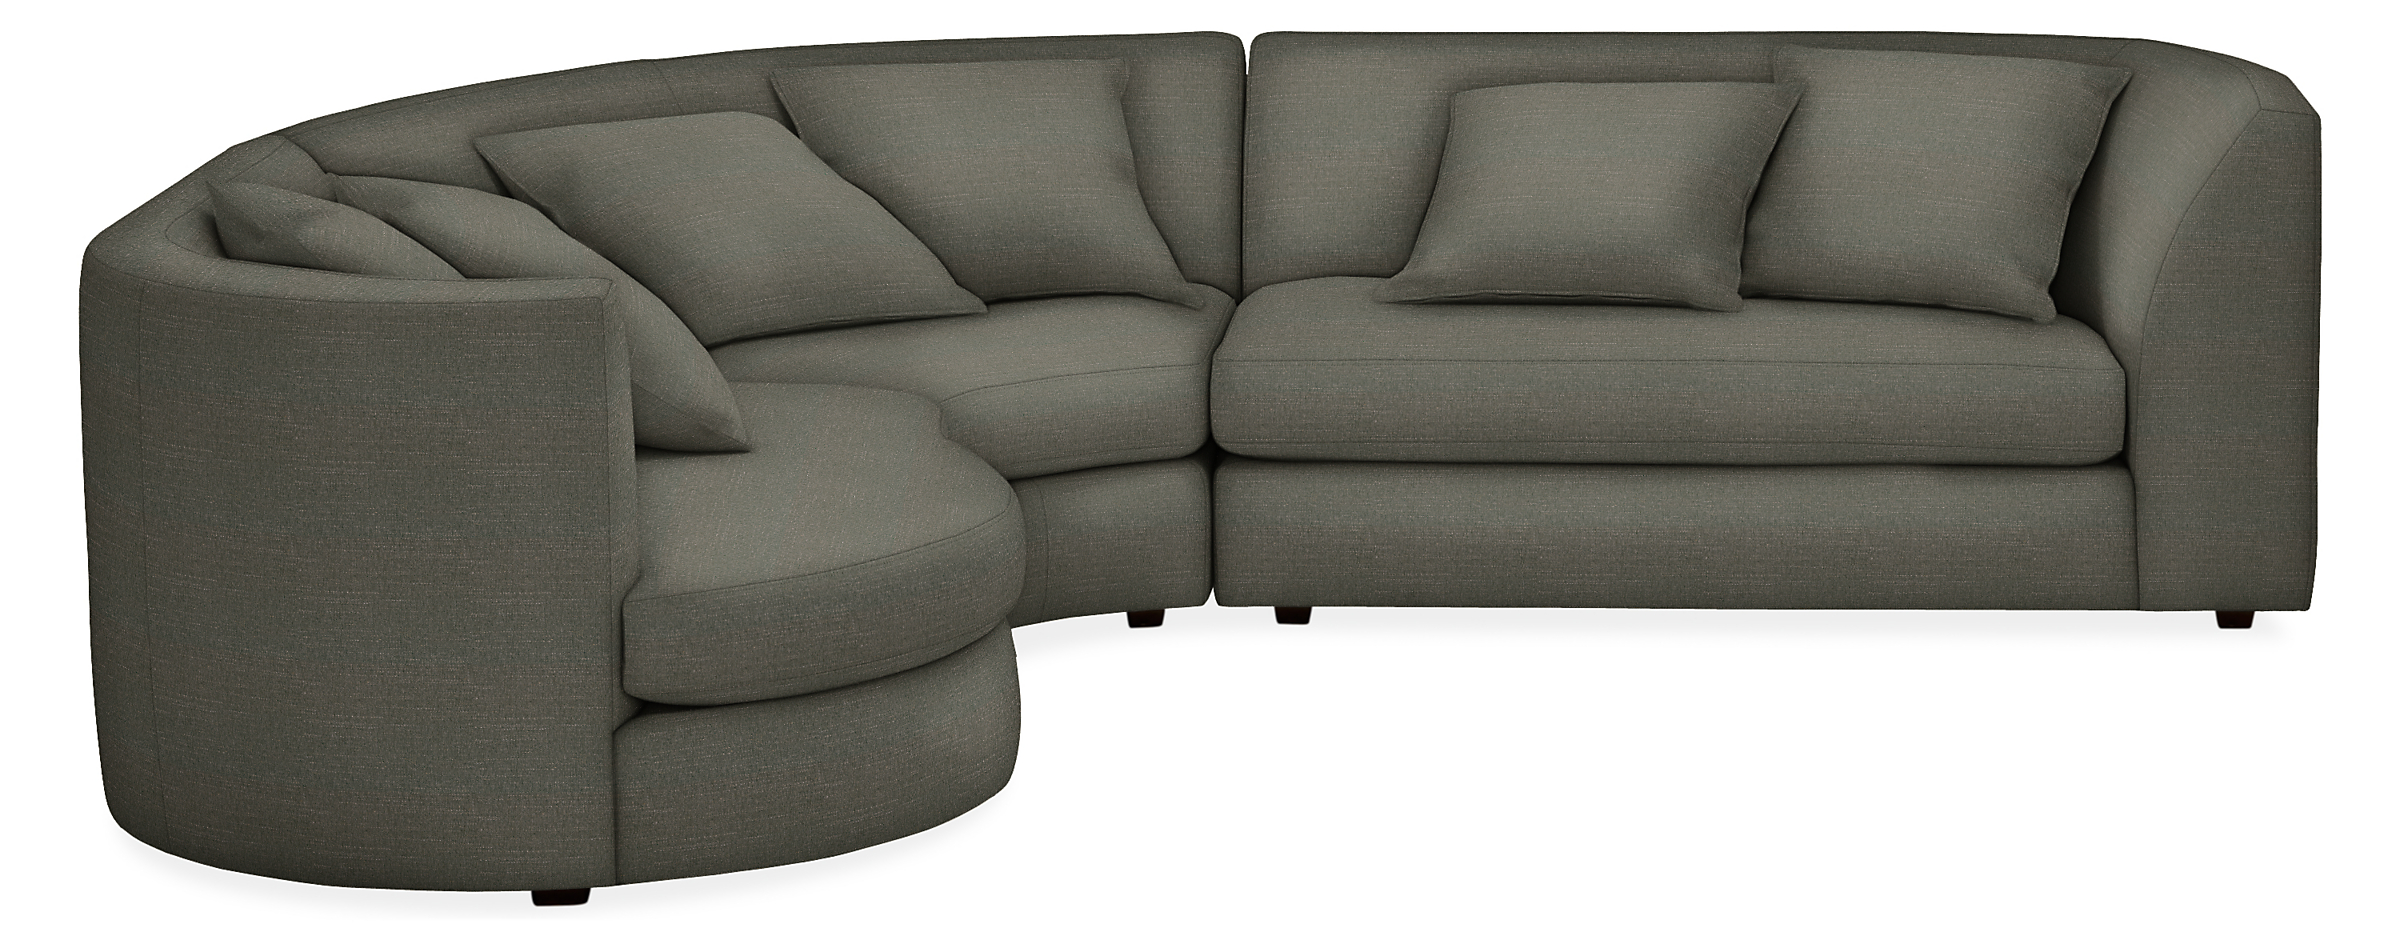 Astaire 110x100" Three-Piece Right-Arm Sofa Sectional